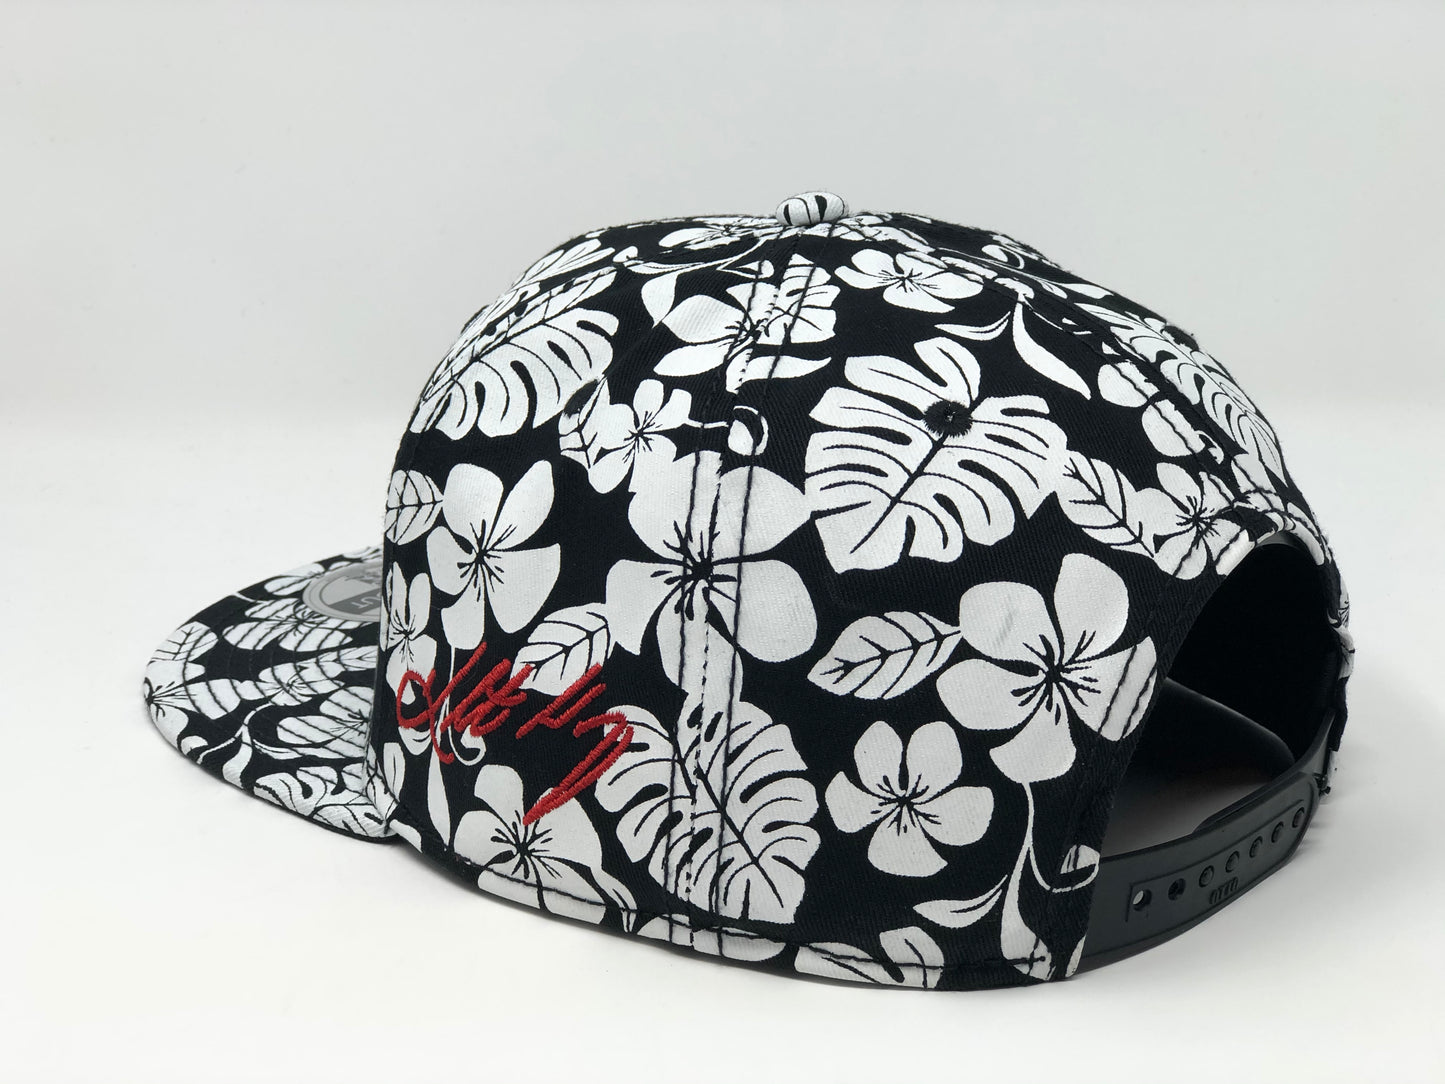 Kolten Wong KW16 Red Compass Hat - Black/White Aloha Snapback - Limited Edition of 16